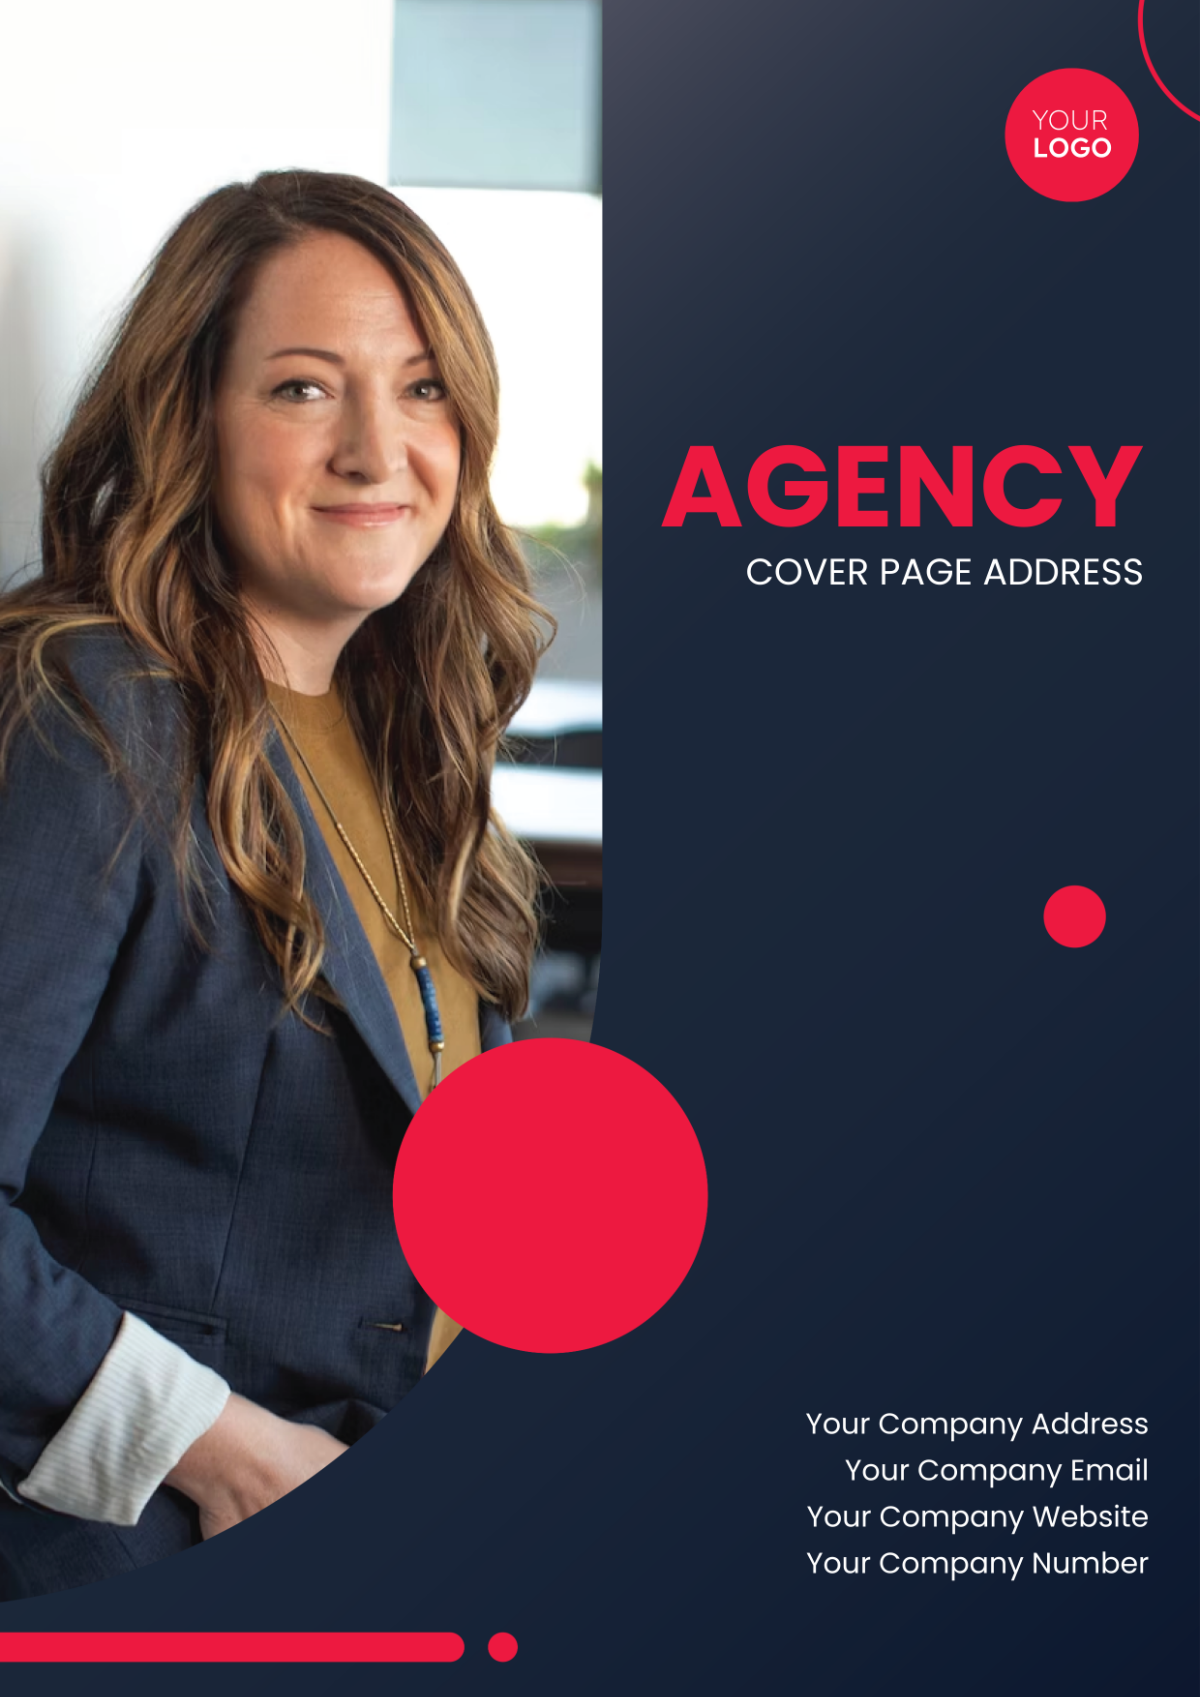 Agency Cover Page Address